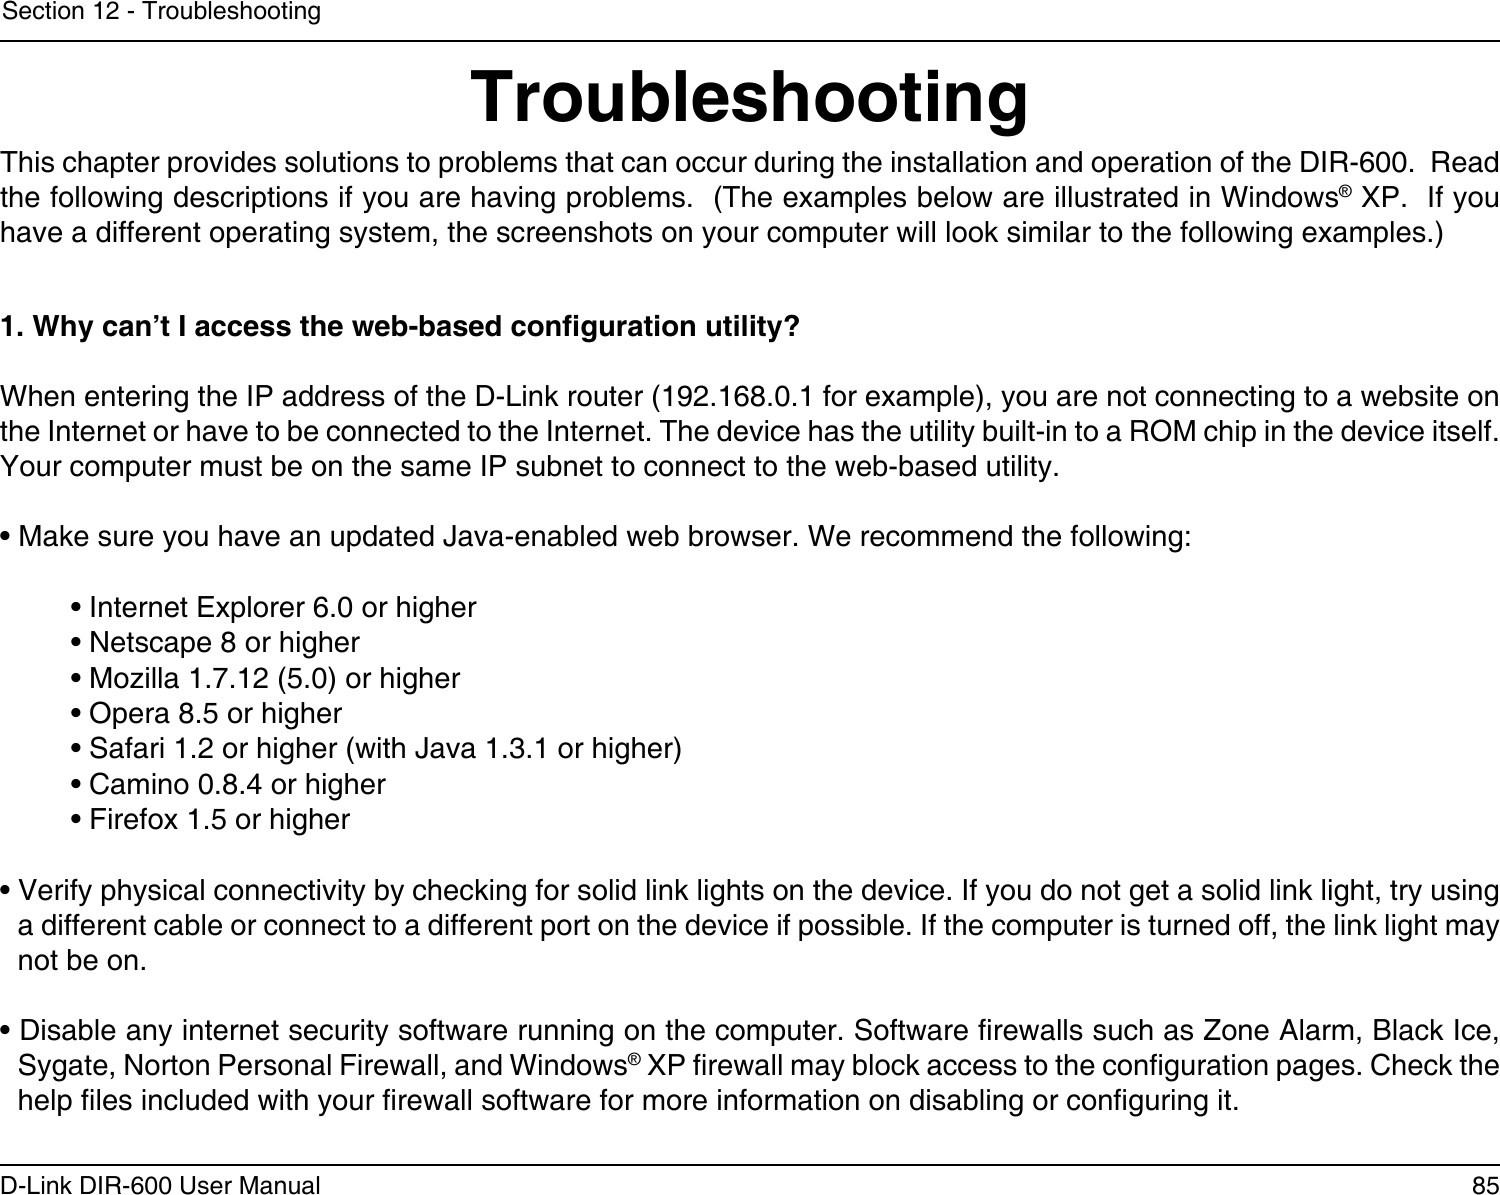 85D-Link DIR-600 User ManualSection 12 - TroubleshootingTroubleshootingThis chapter provides solutions to problems that can occur during the installation and operation of the DIR-600.  Read the following descriptions if you are having problems.  (The examples below are illustrated in Windows® XP.  If you have a different operating system, the screenshots on your computer will look similar to the following examples.)1. Why can’t I access the web-based conguration utility?When entering the IP address of the D-Link router (192.168.0.1 for example), you are not connecting to a website on the Internet or have to be connected to the Internet. The device has the utility built-in to a ROM chip in the device itself. Your computer must be on the same IP subnet to connect to the web-based utility. • Make sure you have an updated Java-enabled web browser. We recommend the following: • Internet Explorer 6.0 or higher • Netscape 8 or higher • Mozilla 1.7.12 (5.0) or higher • Opera 8.5 or higher • Safari 1.2 or higher (with Java 1.3.1 or higher) • Camino 0.8.4 or higher • Firefox 1.5 or higher • Verify physical connectivity by checking for solid link lights on the device. If you do not get a solid link light, try using a different cable or connect to a different port on the device if possible. If the computer is turned off, the link light may not be on.• Disable any internet security software running on the computer. Software rewalls such as Zone Alarm, Black Ice, Sygate, Norton Personal Firewall, and Windows® XP rewall may block access to the conguration pages. Check the help les included with your rewall software for more information on disabling or conguring it.